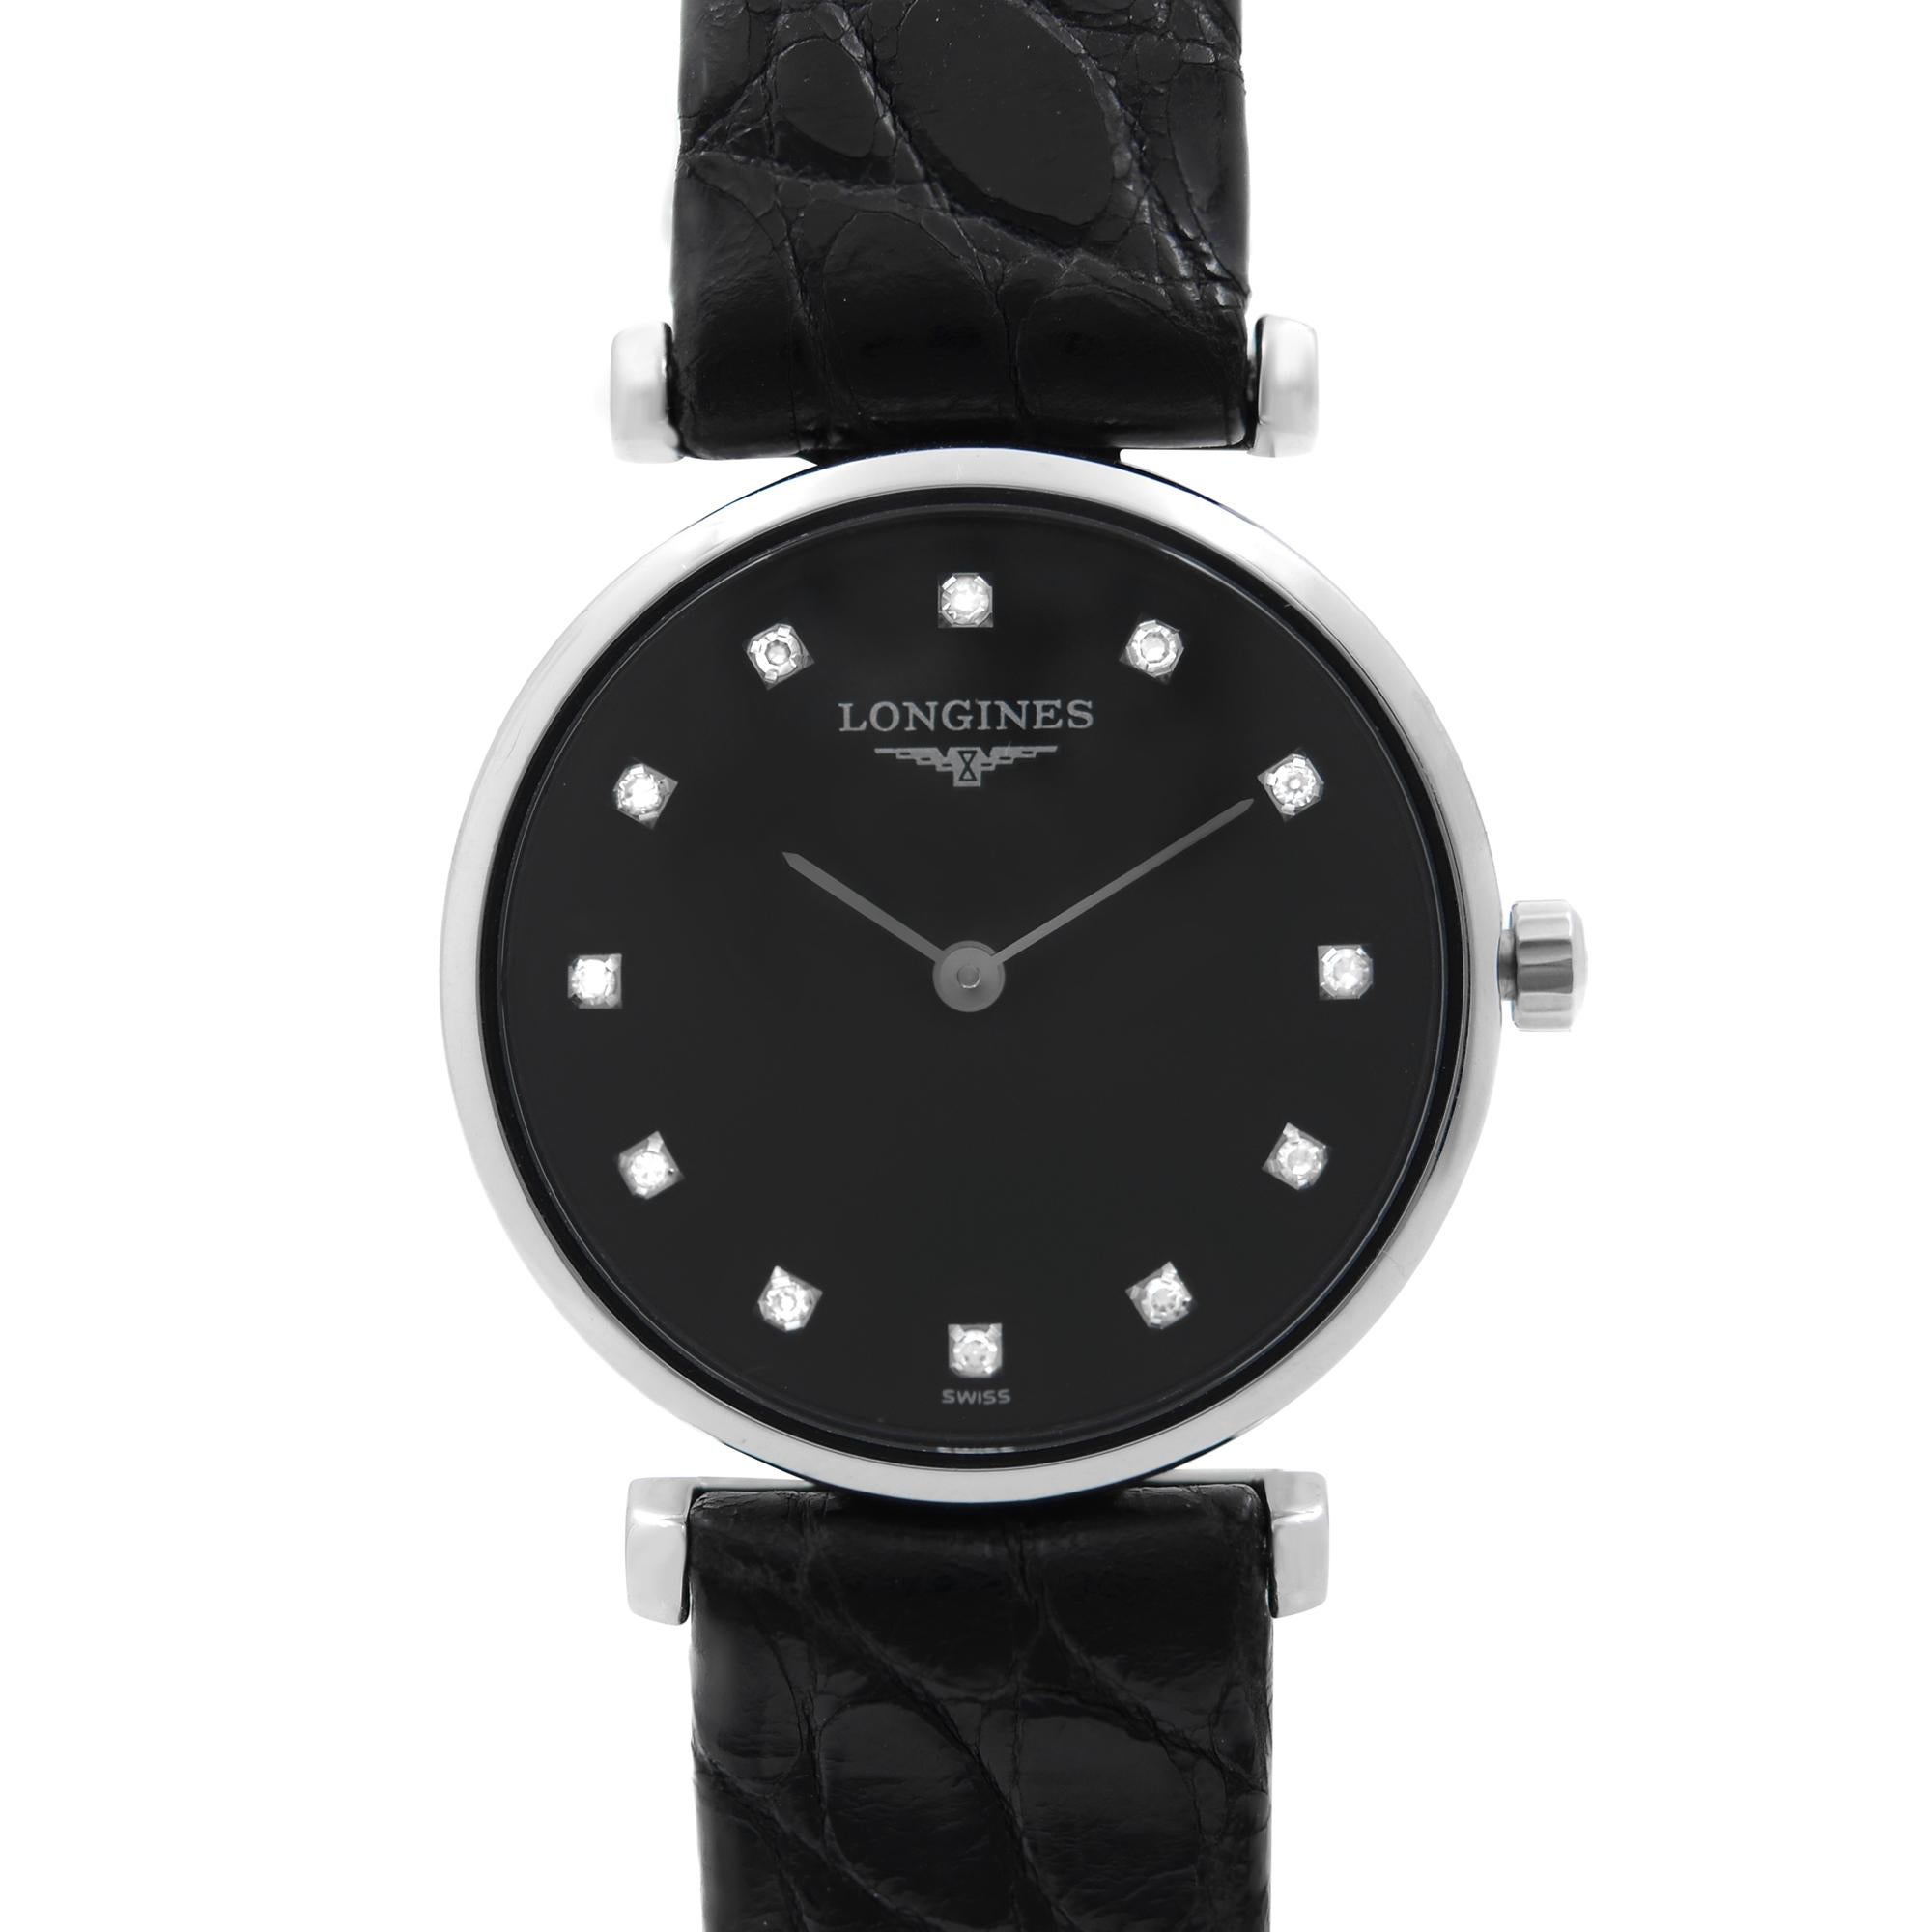 Never Worn Longines La Grande Classique Steel Black Diamond Dial Ladies Watch L4.209.4.58.2. This Beautiful Timepiece is Powered by a Quartz (Battery) Movement and Features: Round Stainless Steel Case with a Black Leather Strap, Fixed Stainless